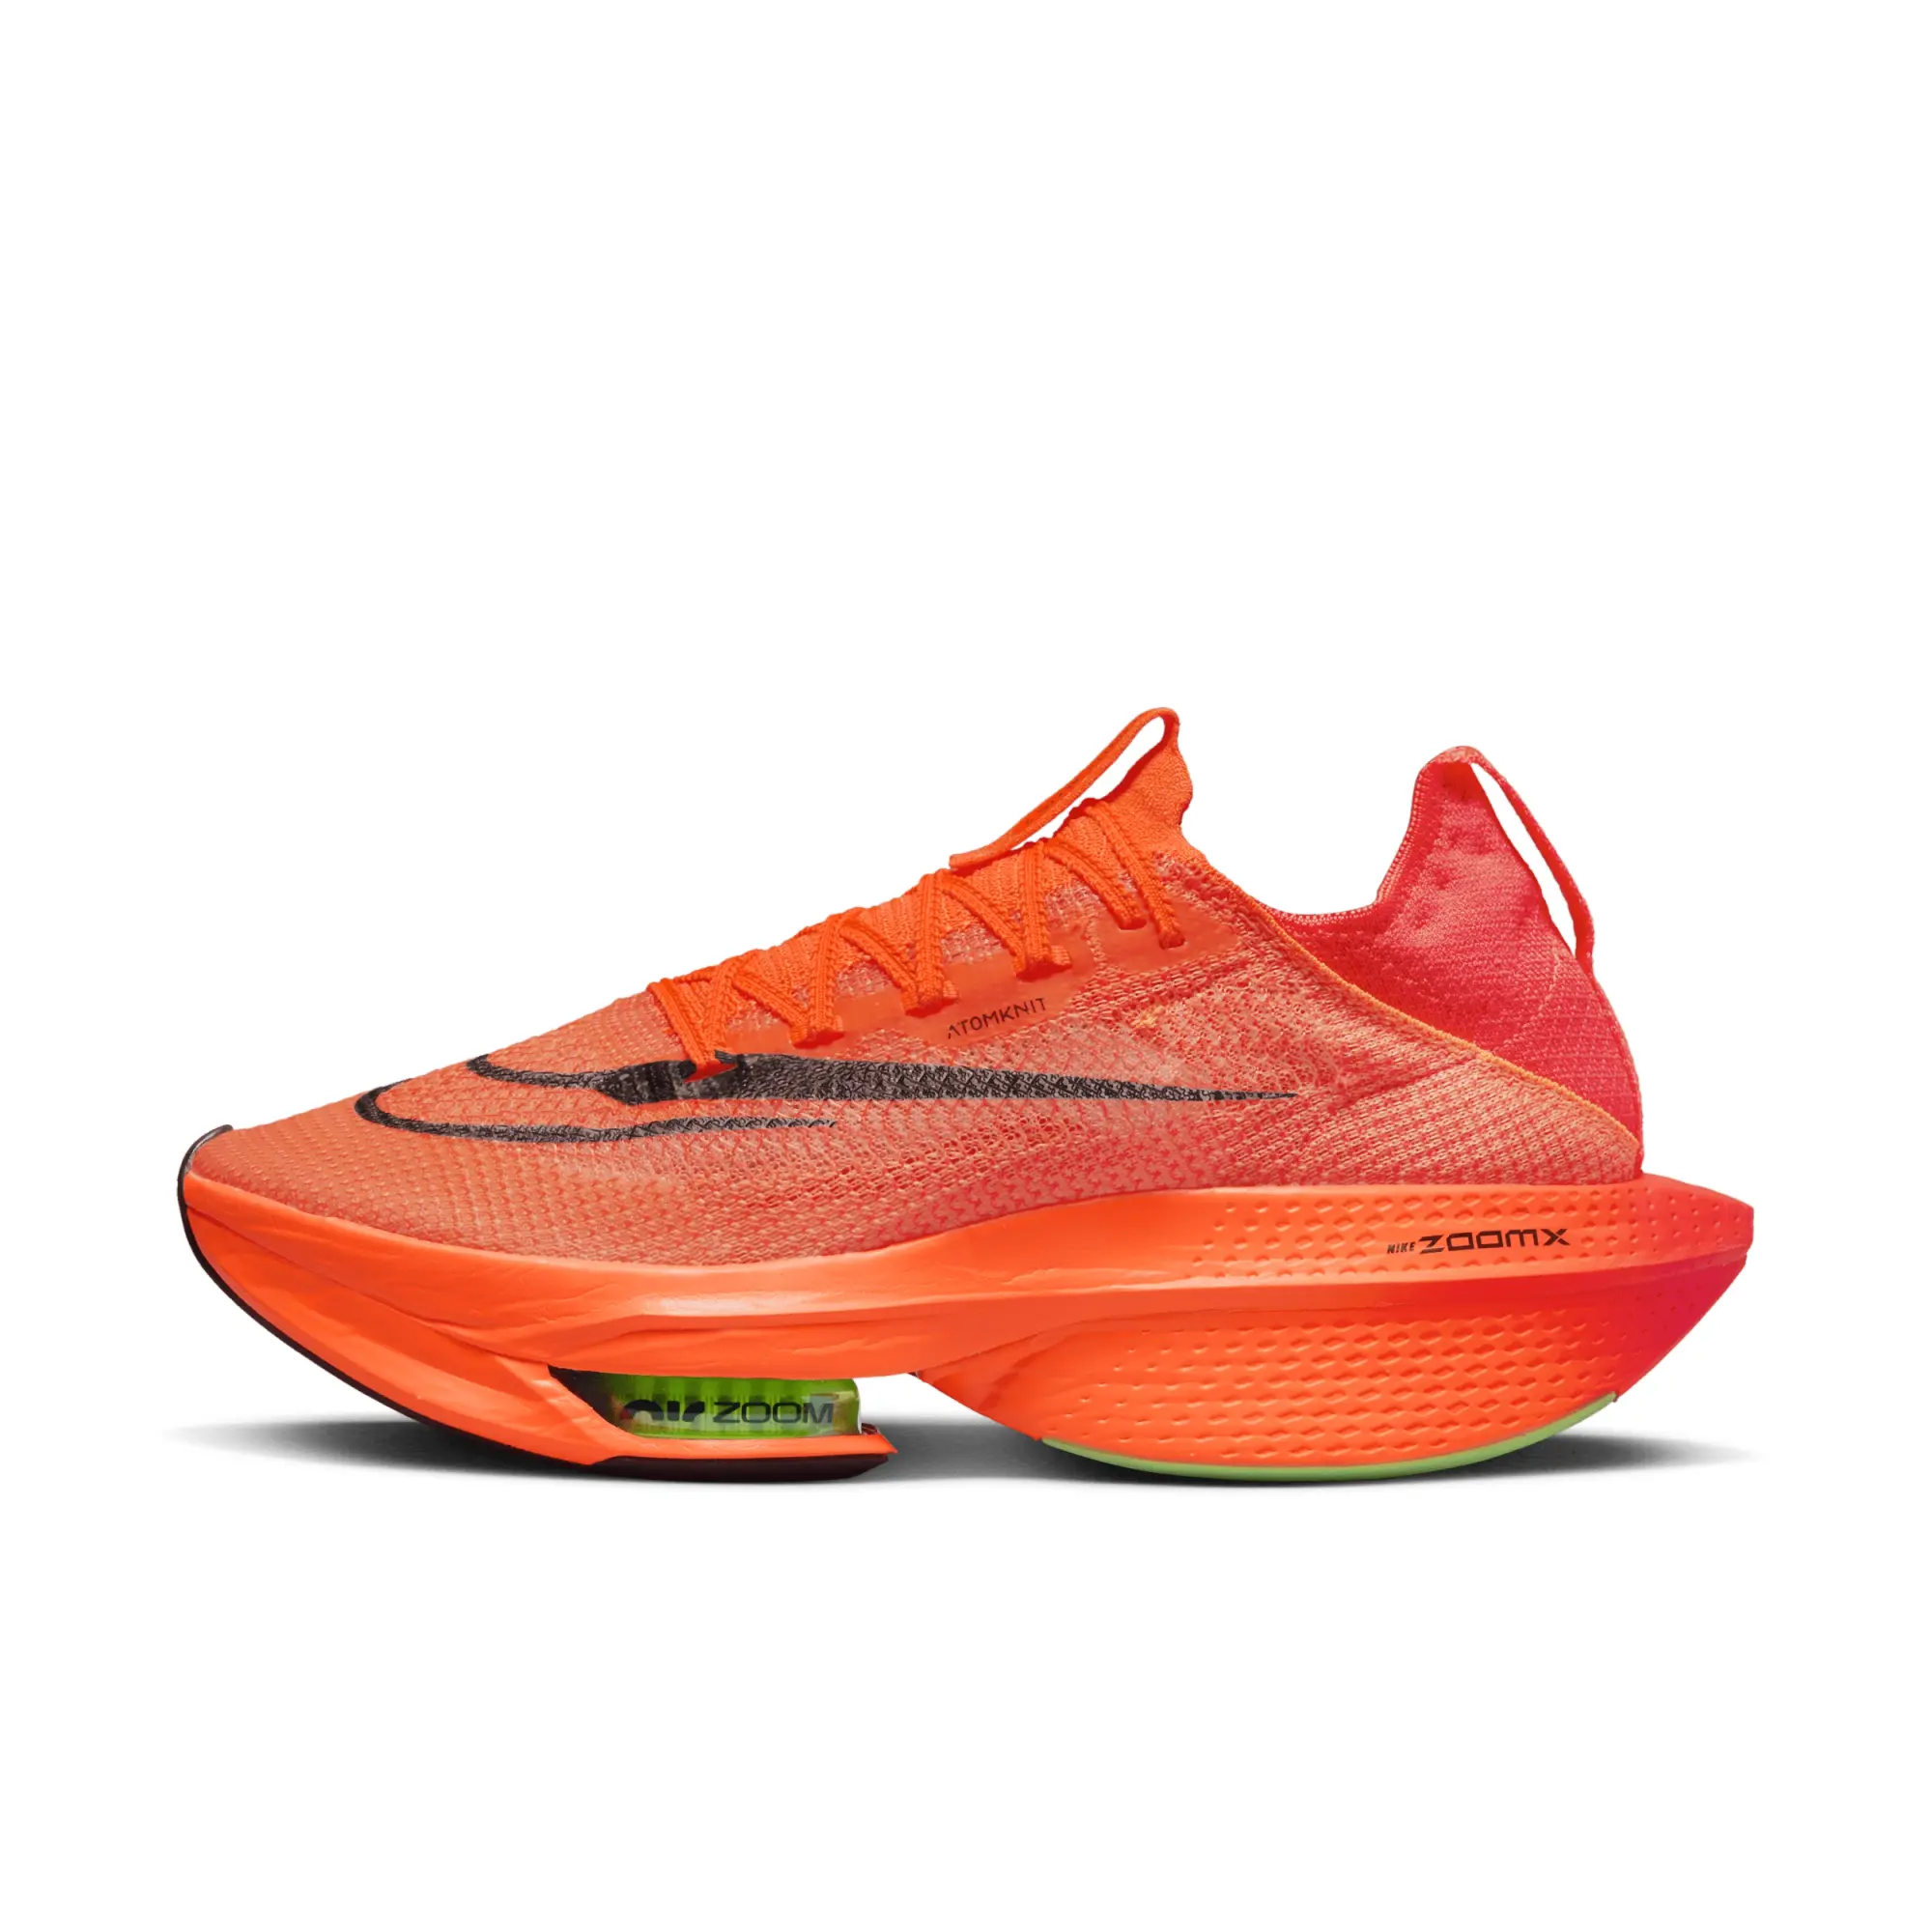 Nike Air Zoom Alphafly Next% 2 Total Orange Shoes